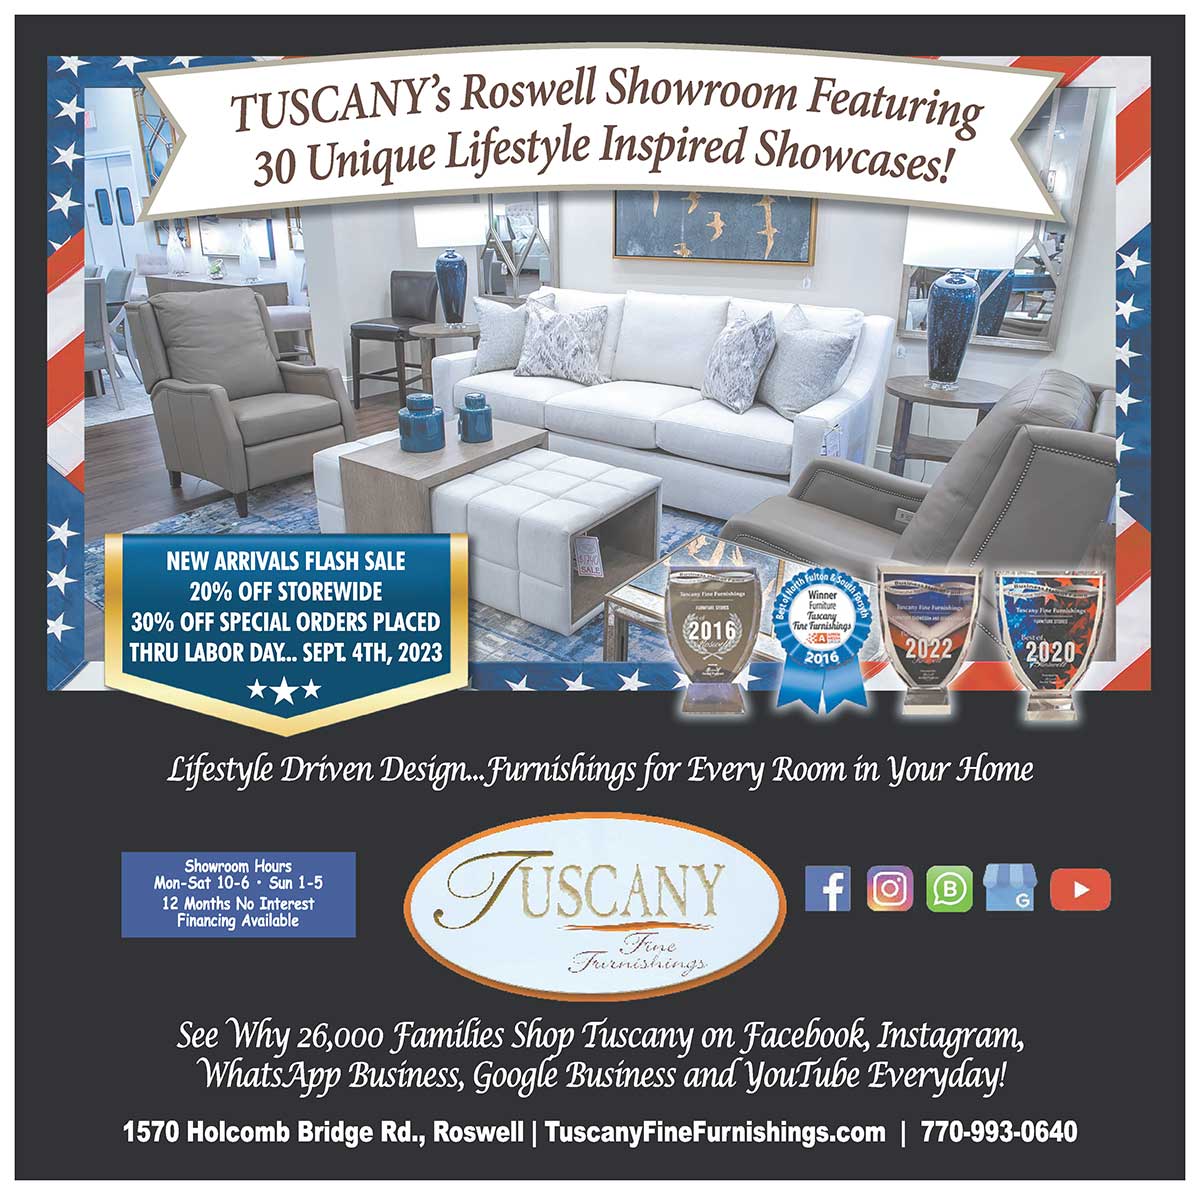 August 2023 ad for Tuscany Fine Furnishings in Roswell, GA